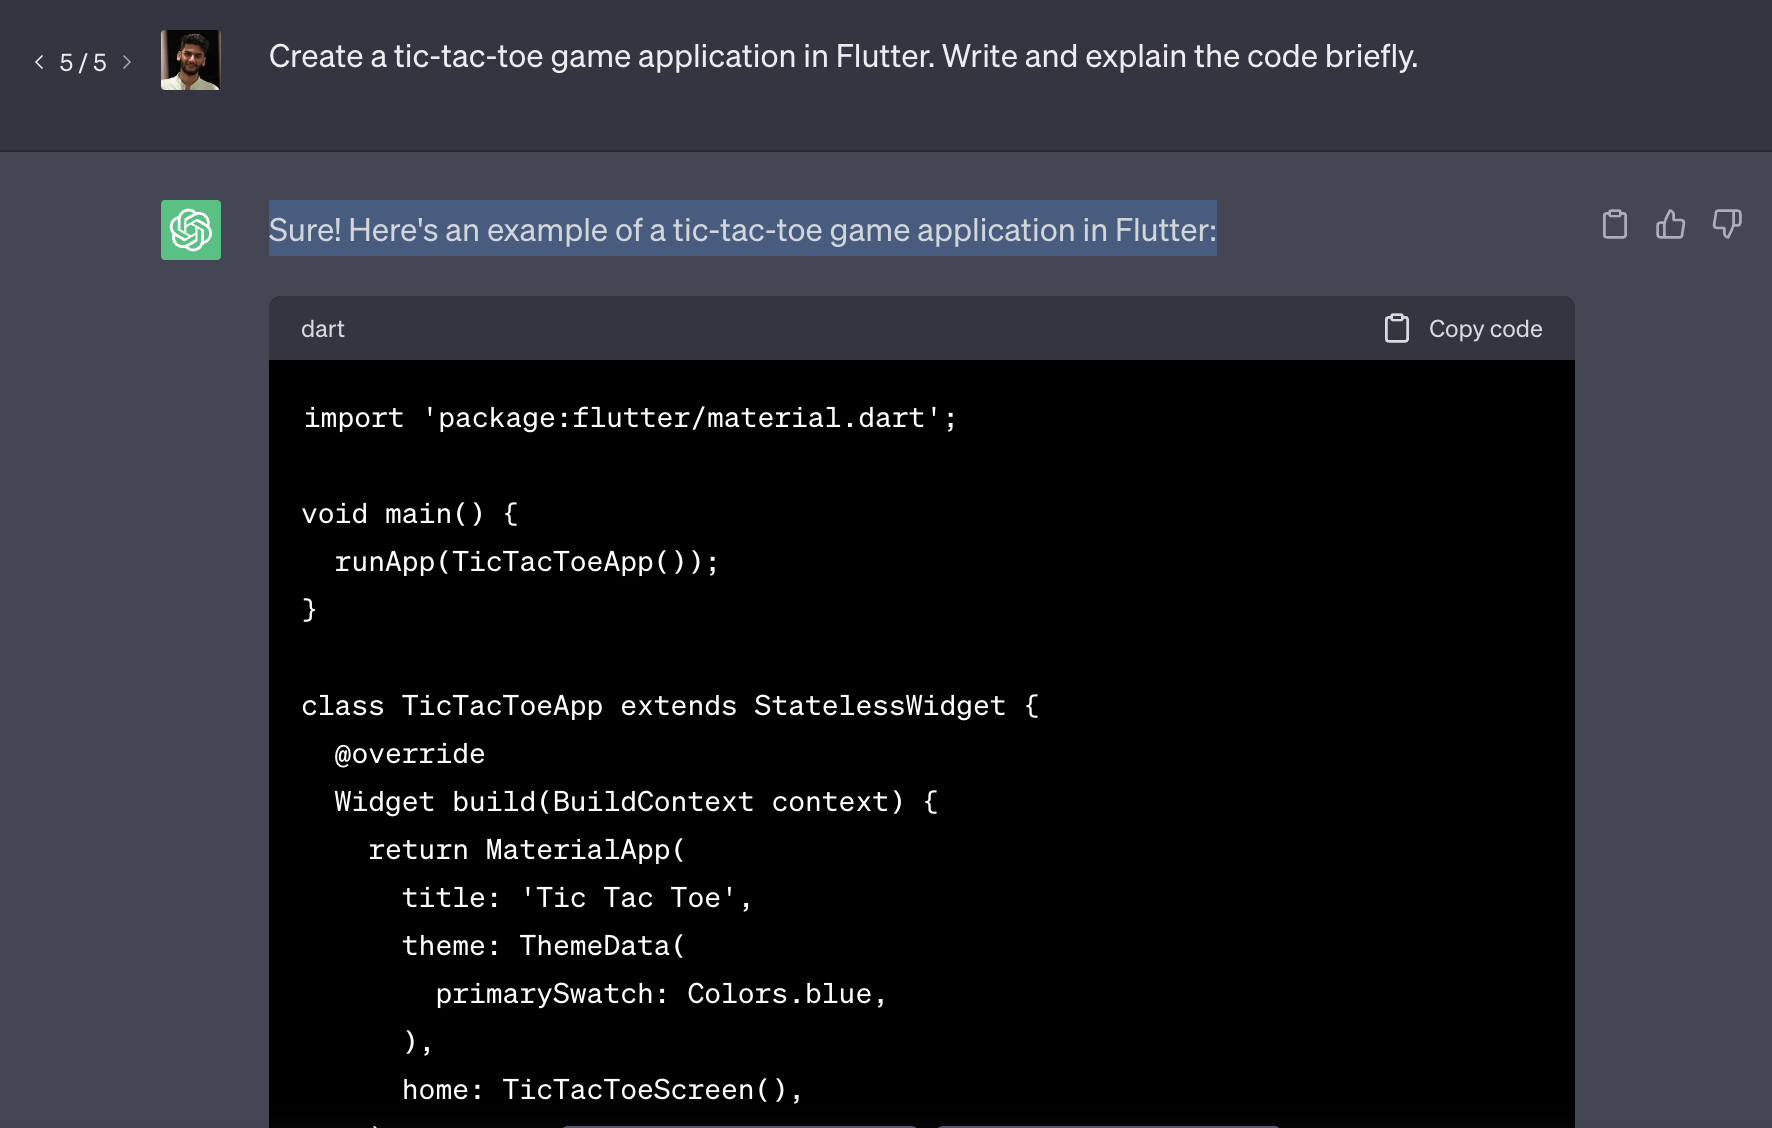 Create a tic-tac-toe game application in Flutter. Write and explain the code briefly.